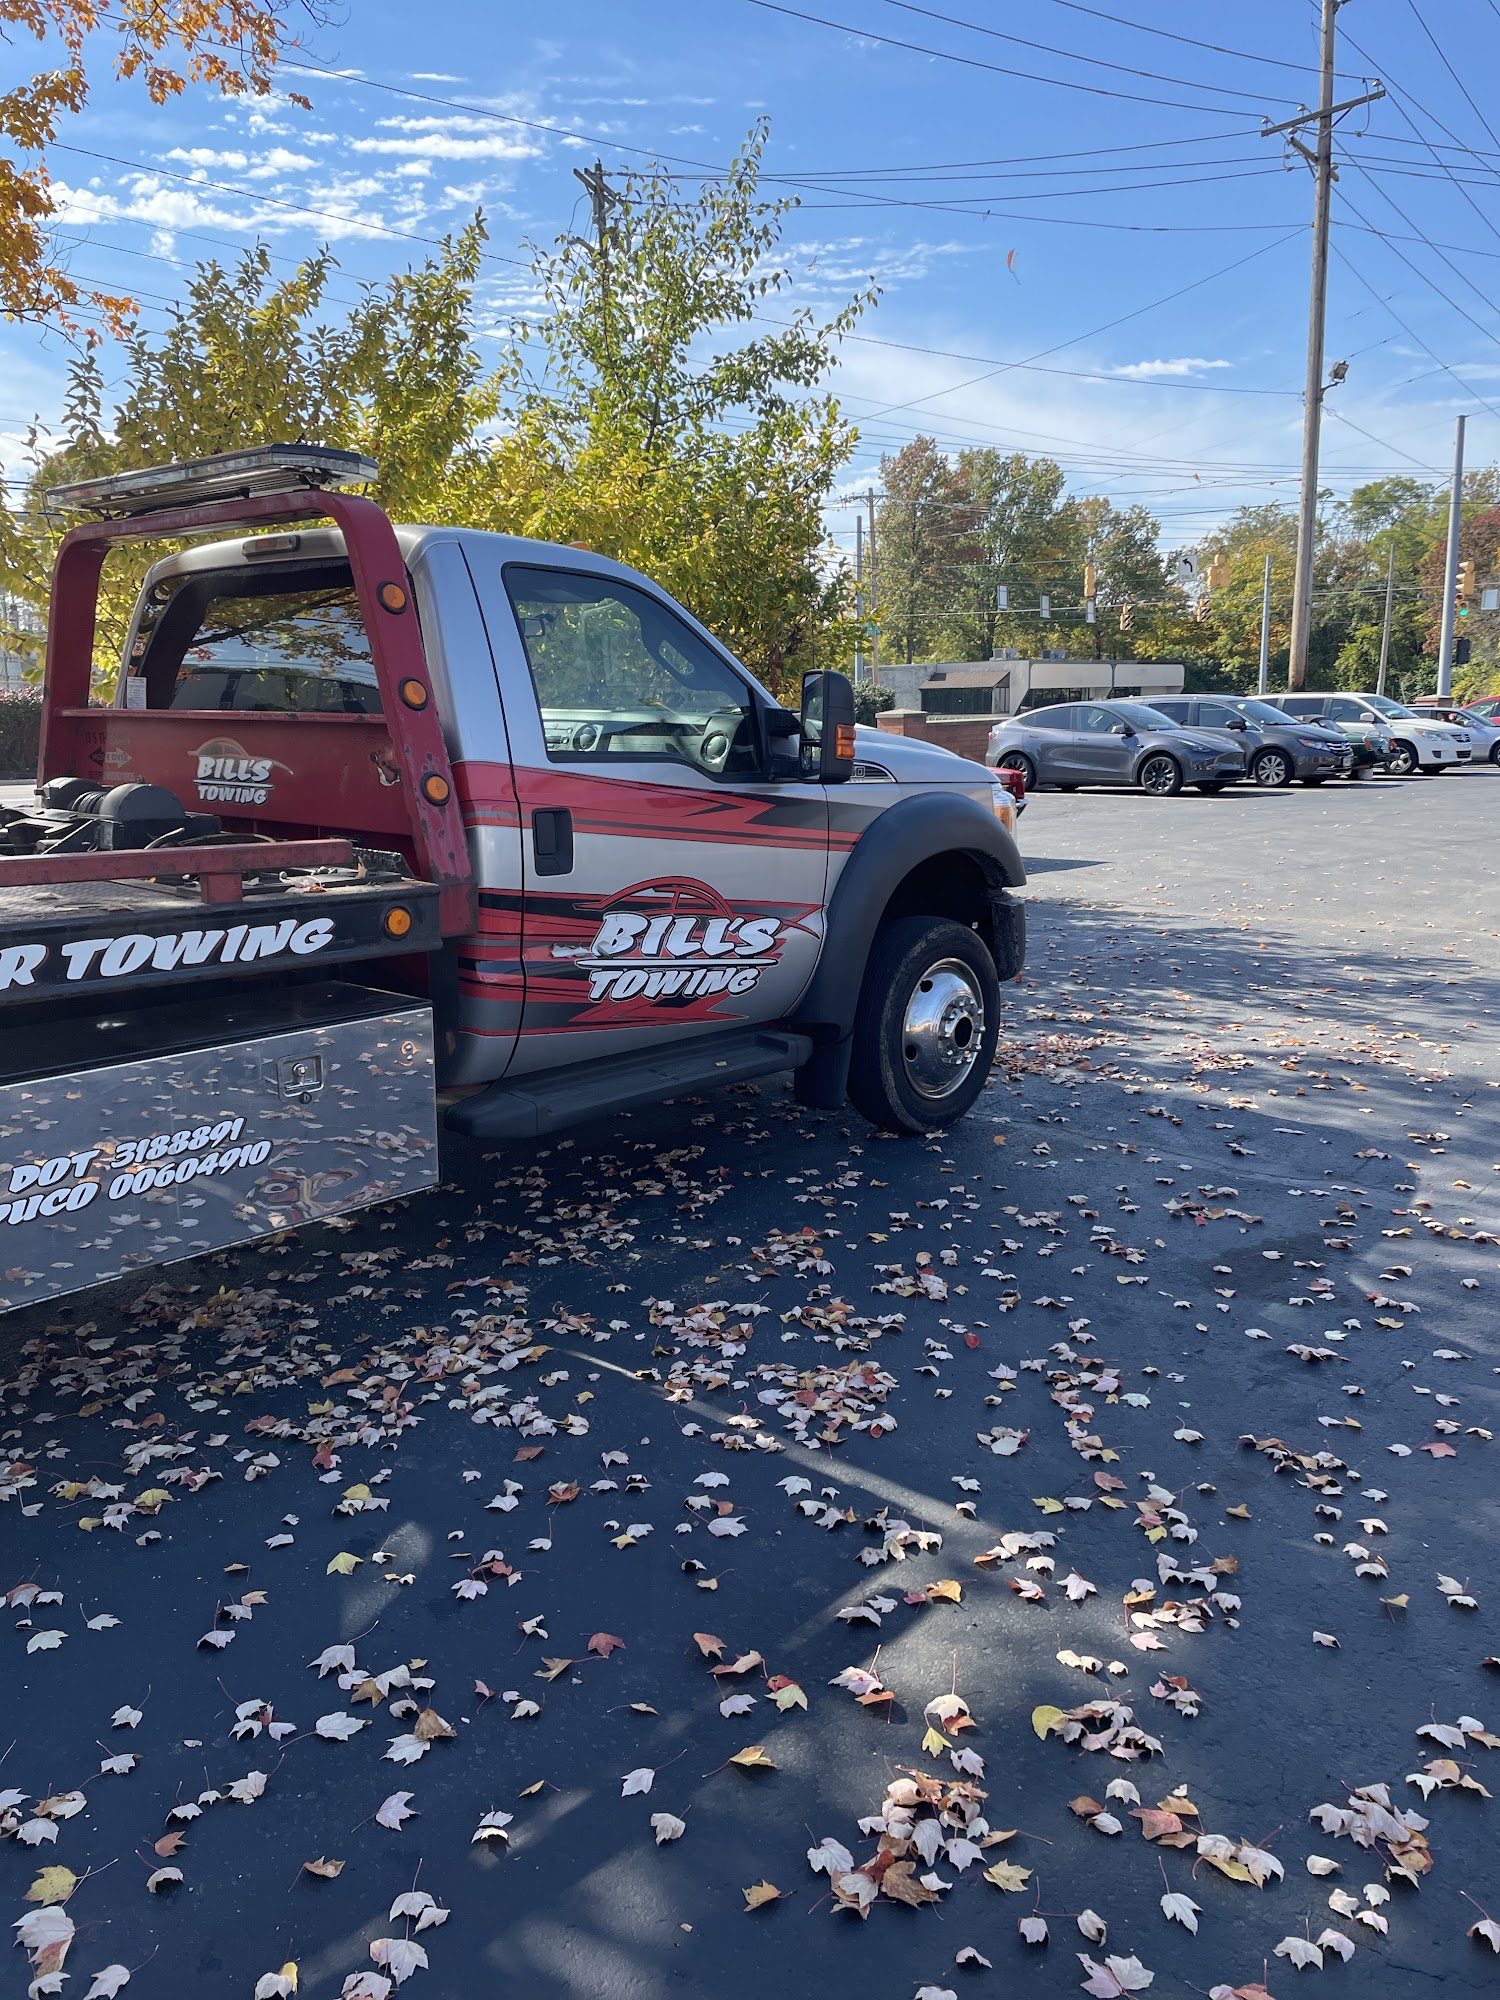 Bill's Auto & Towing Service